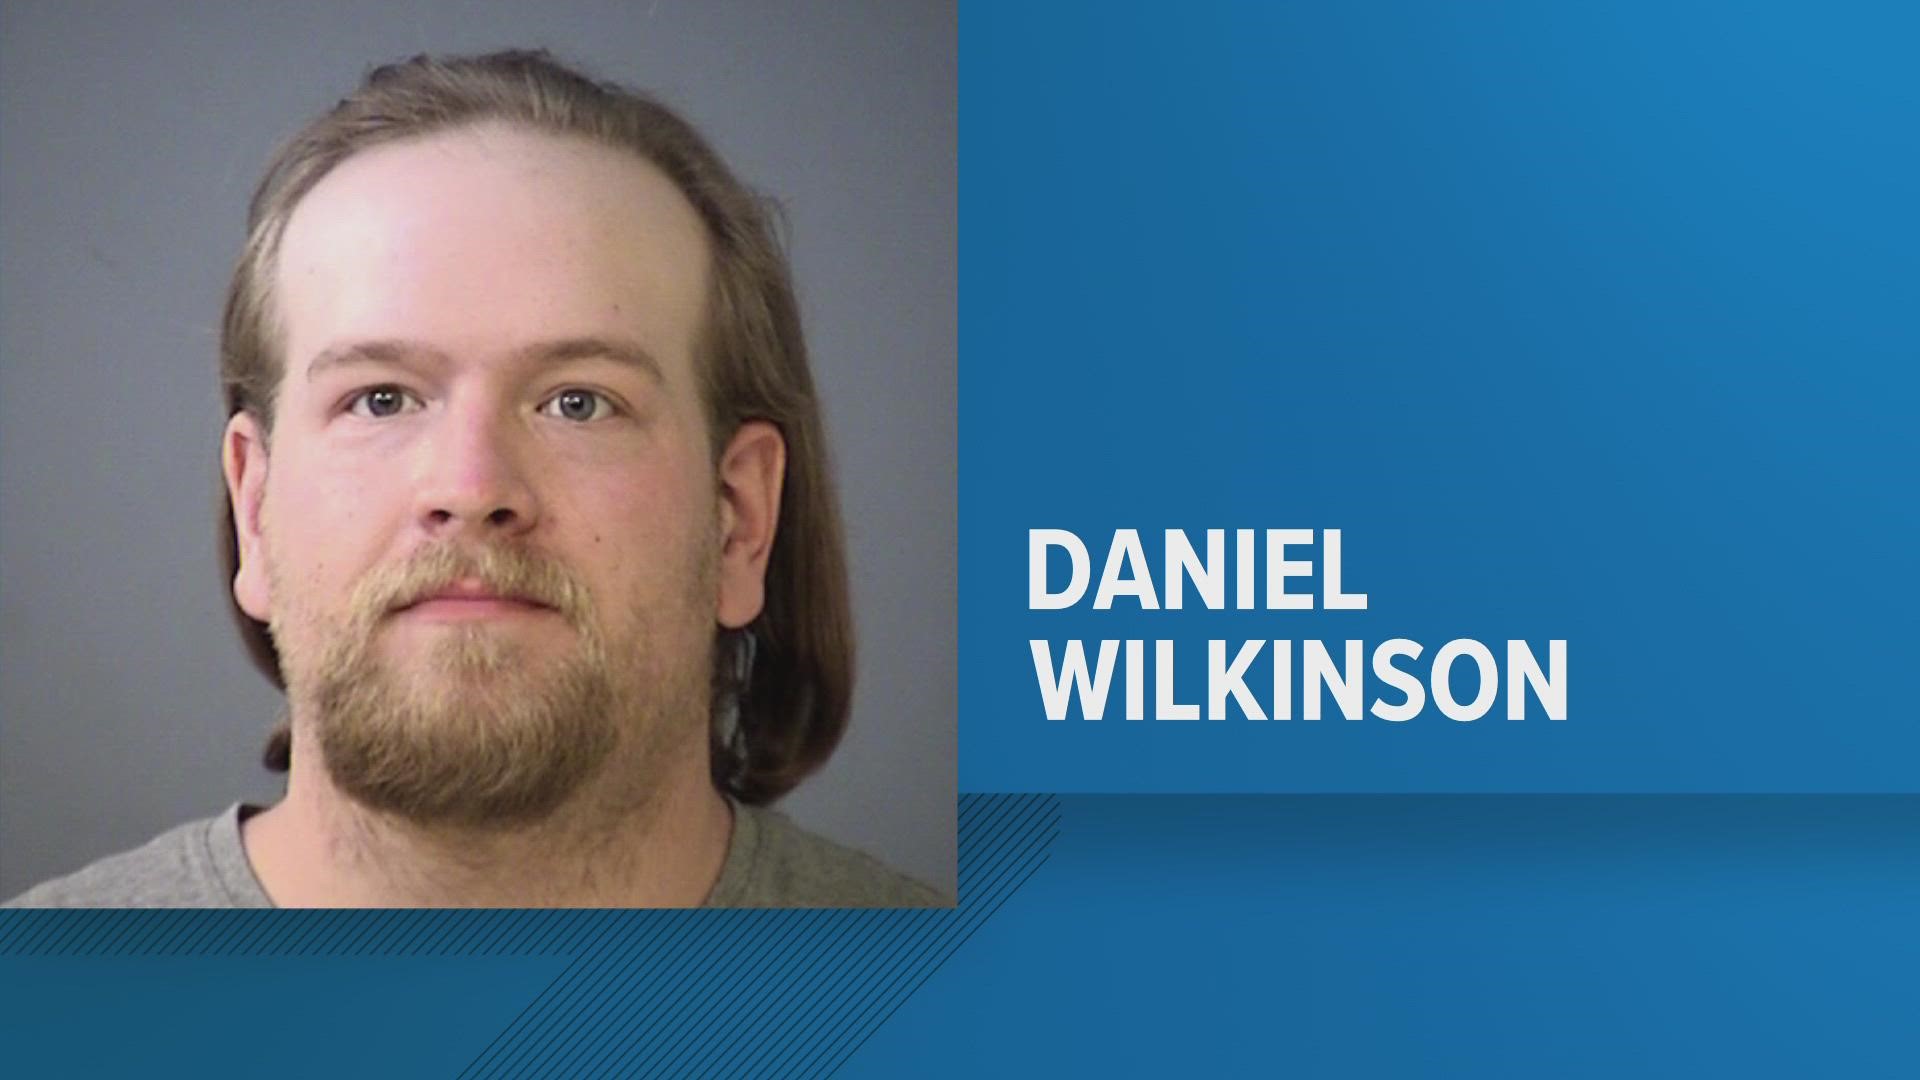 Daniel Wilkinson pleaded guilty on Tuesday to robbing five different Chase Banks in the Indianapolis area between September 5 and November 17, 2020.